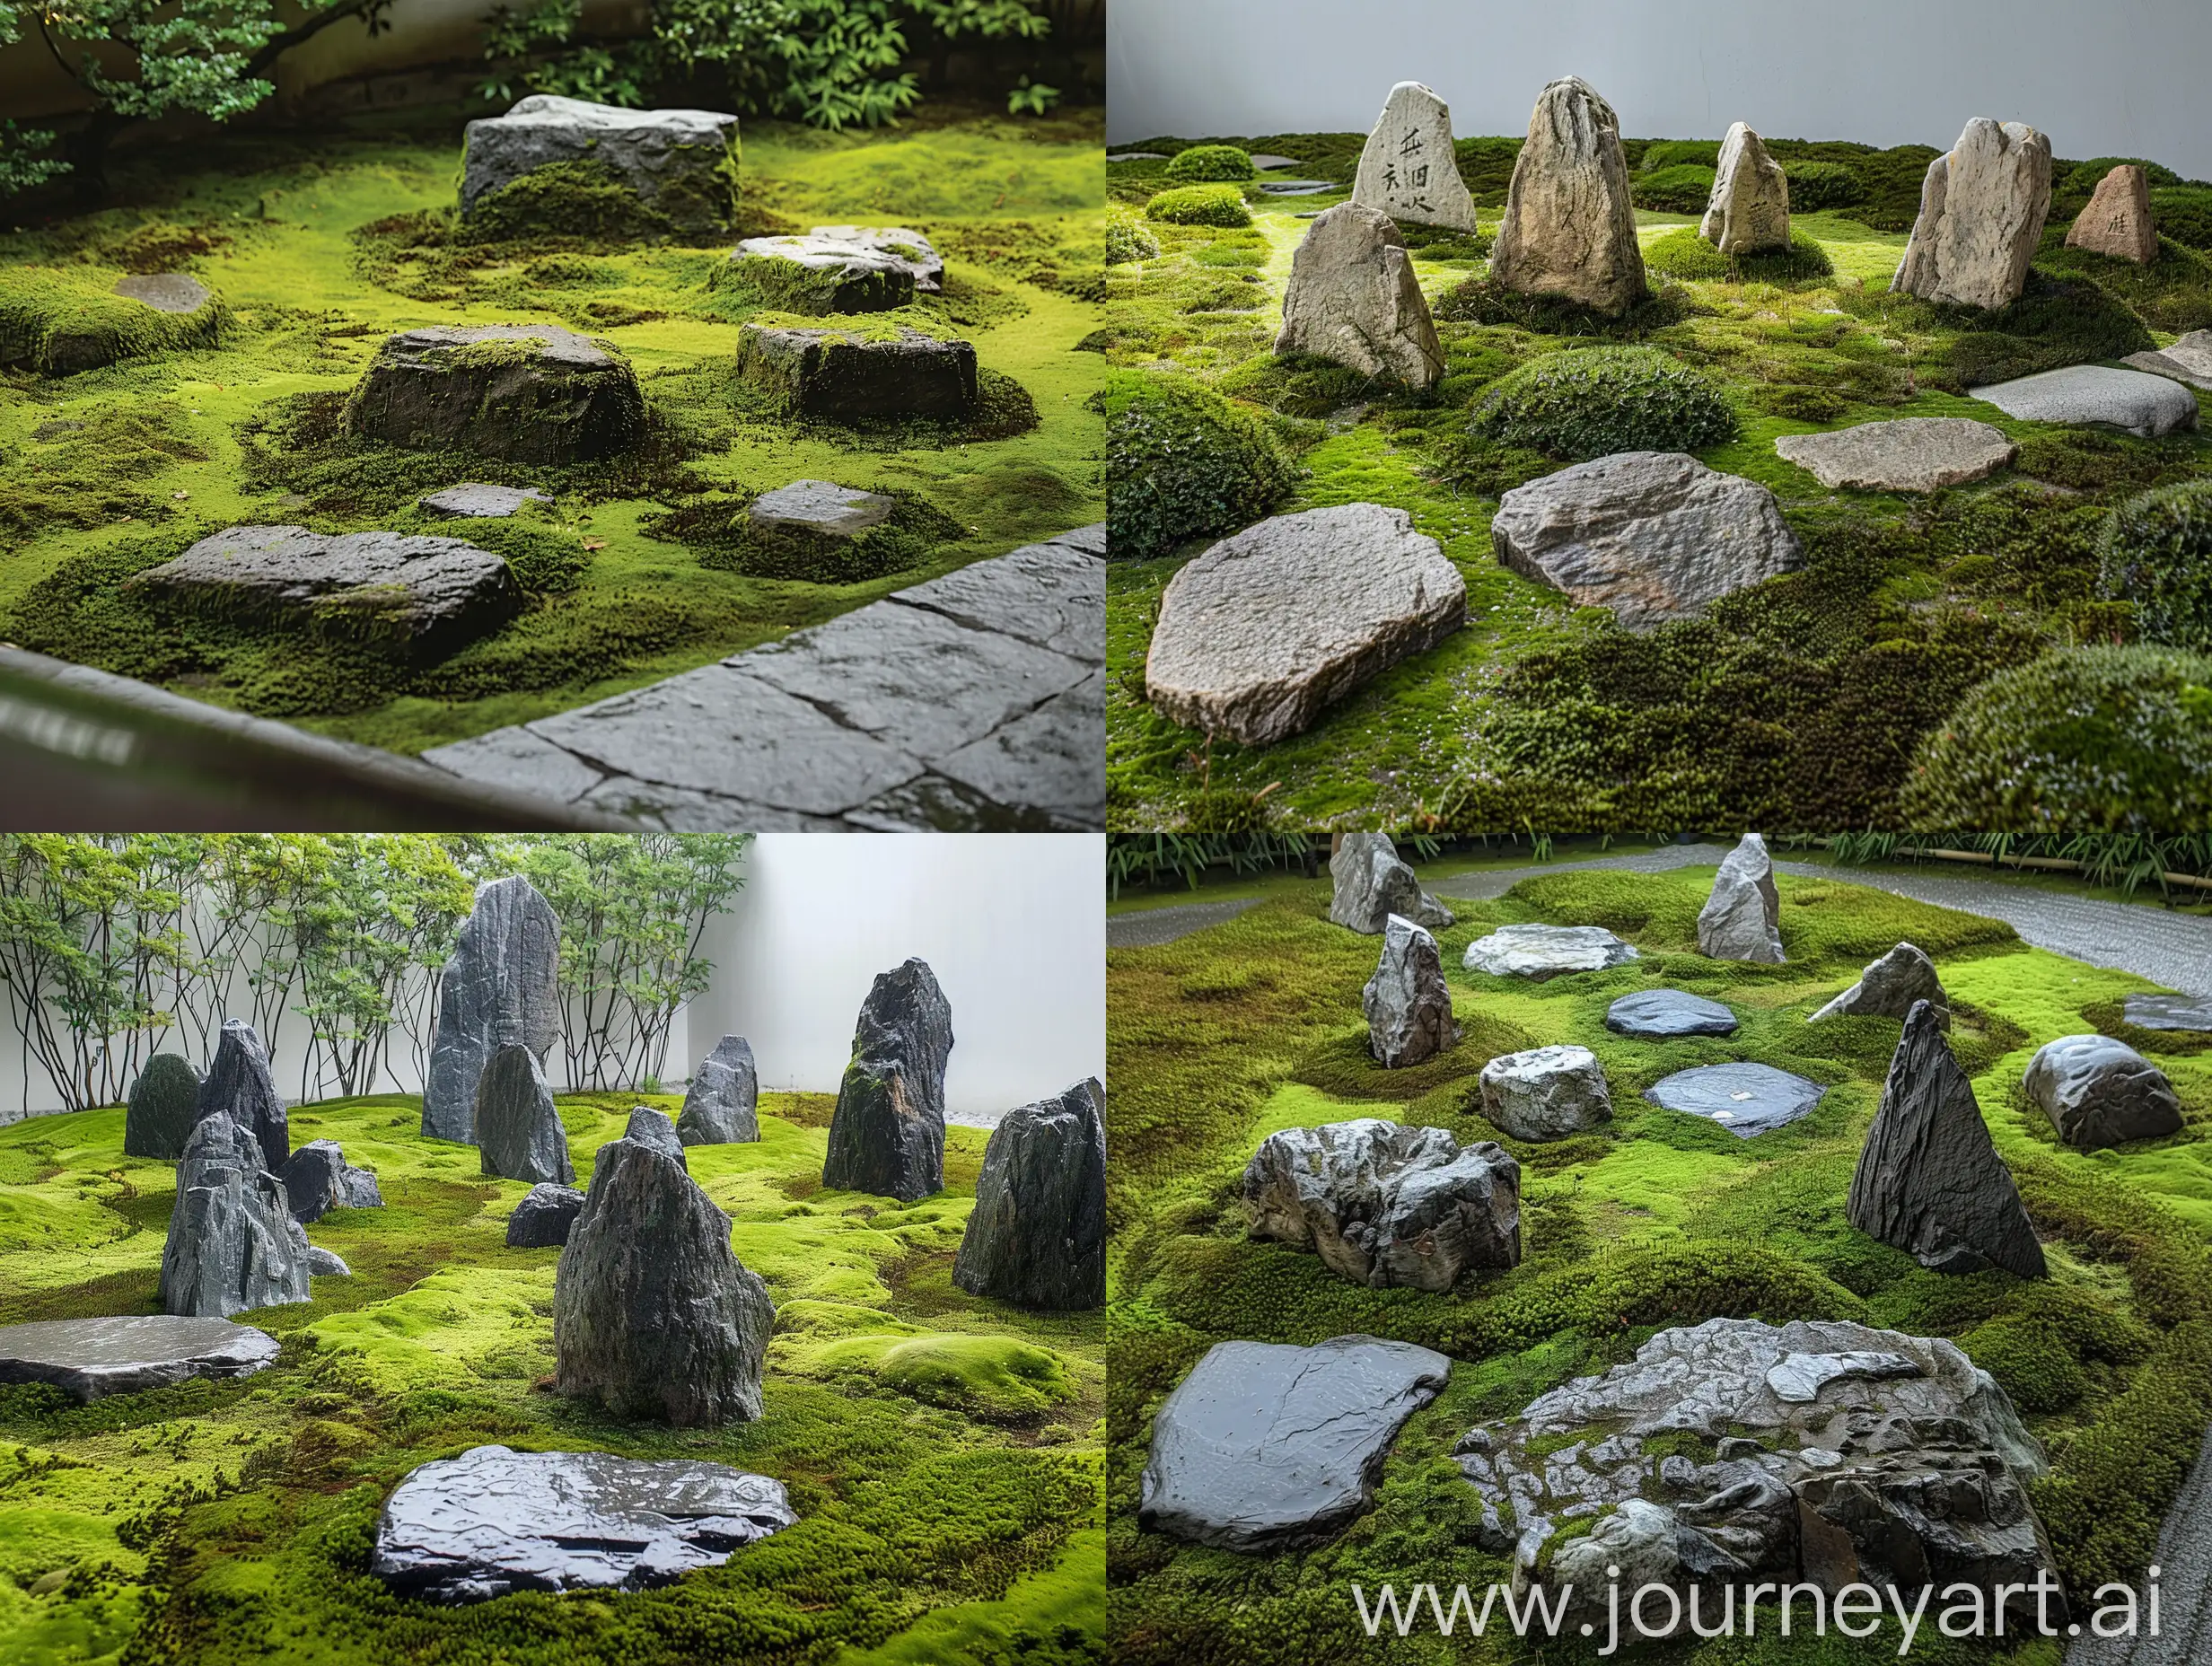 A serene scene of Ryoan-ji Temple's rock garden, with carefully arranged stones surrounded by moss. The minimalist beauty of the garden evokes a sense of calm and tranquility, inviting viewers to pause and reflect.